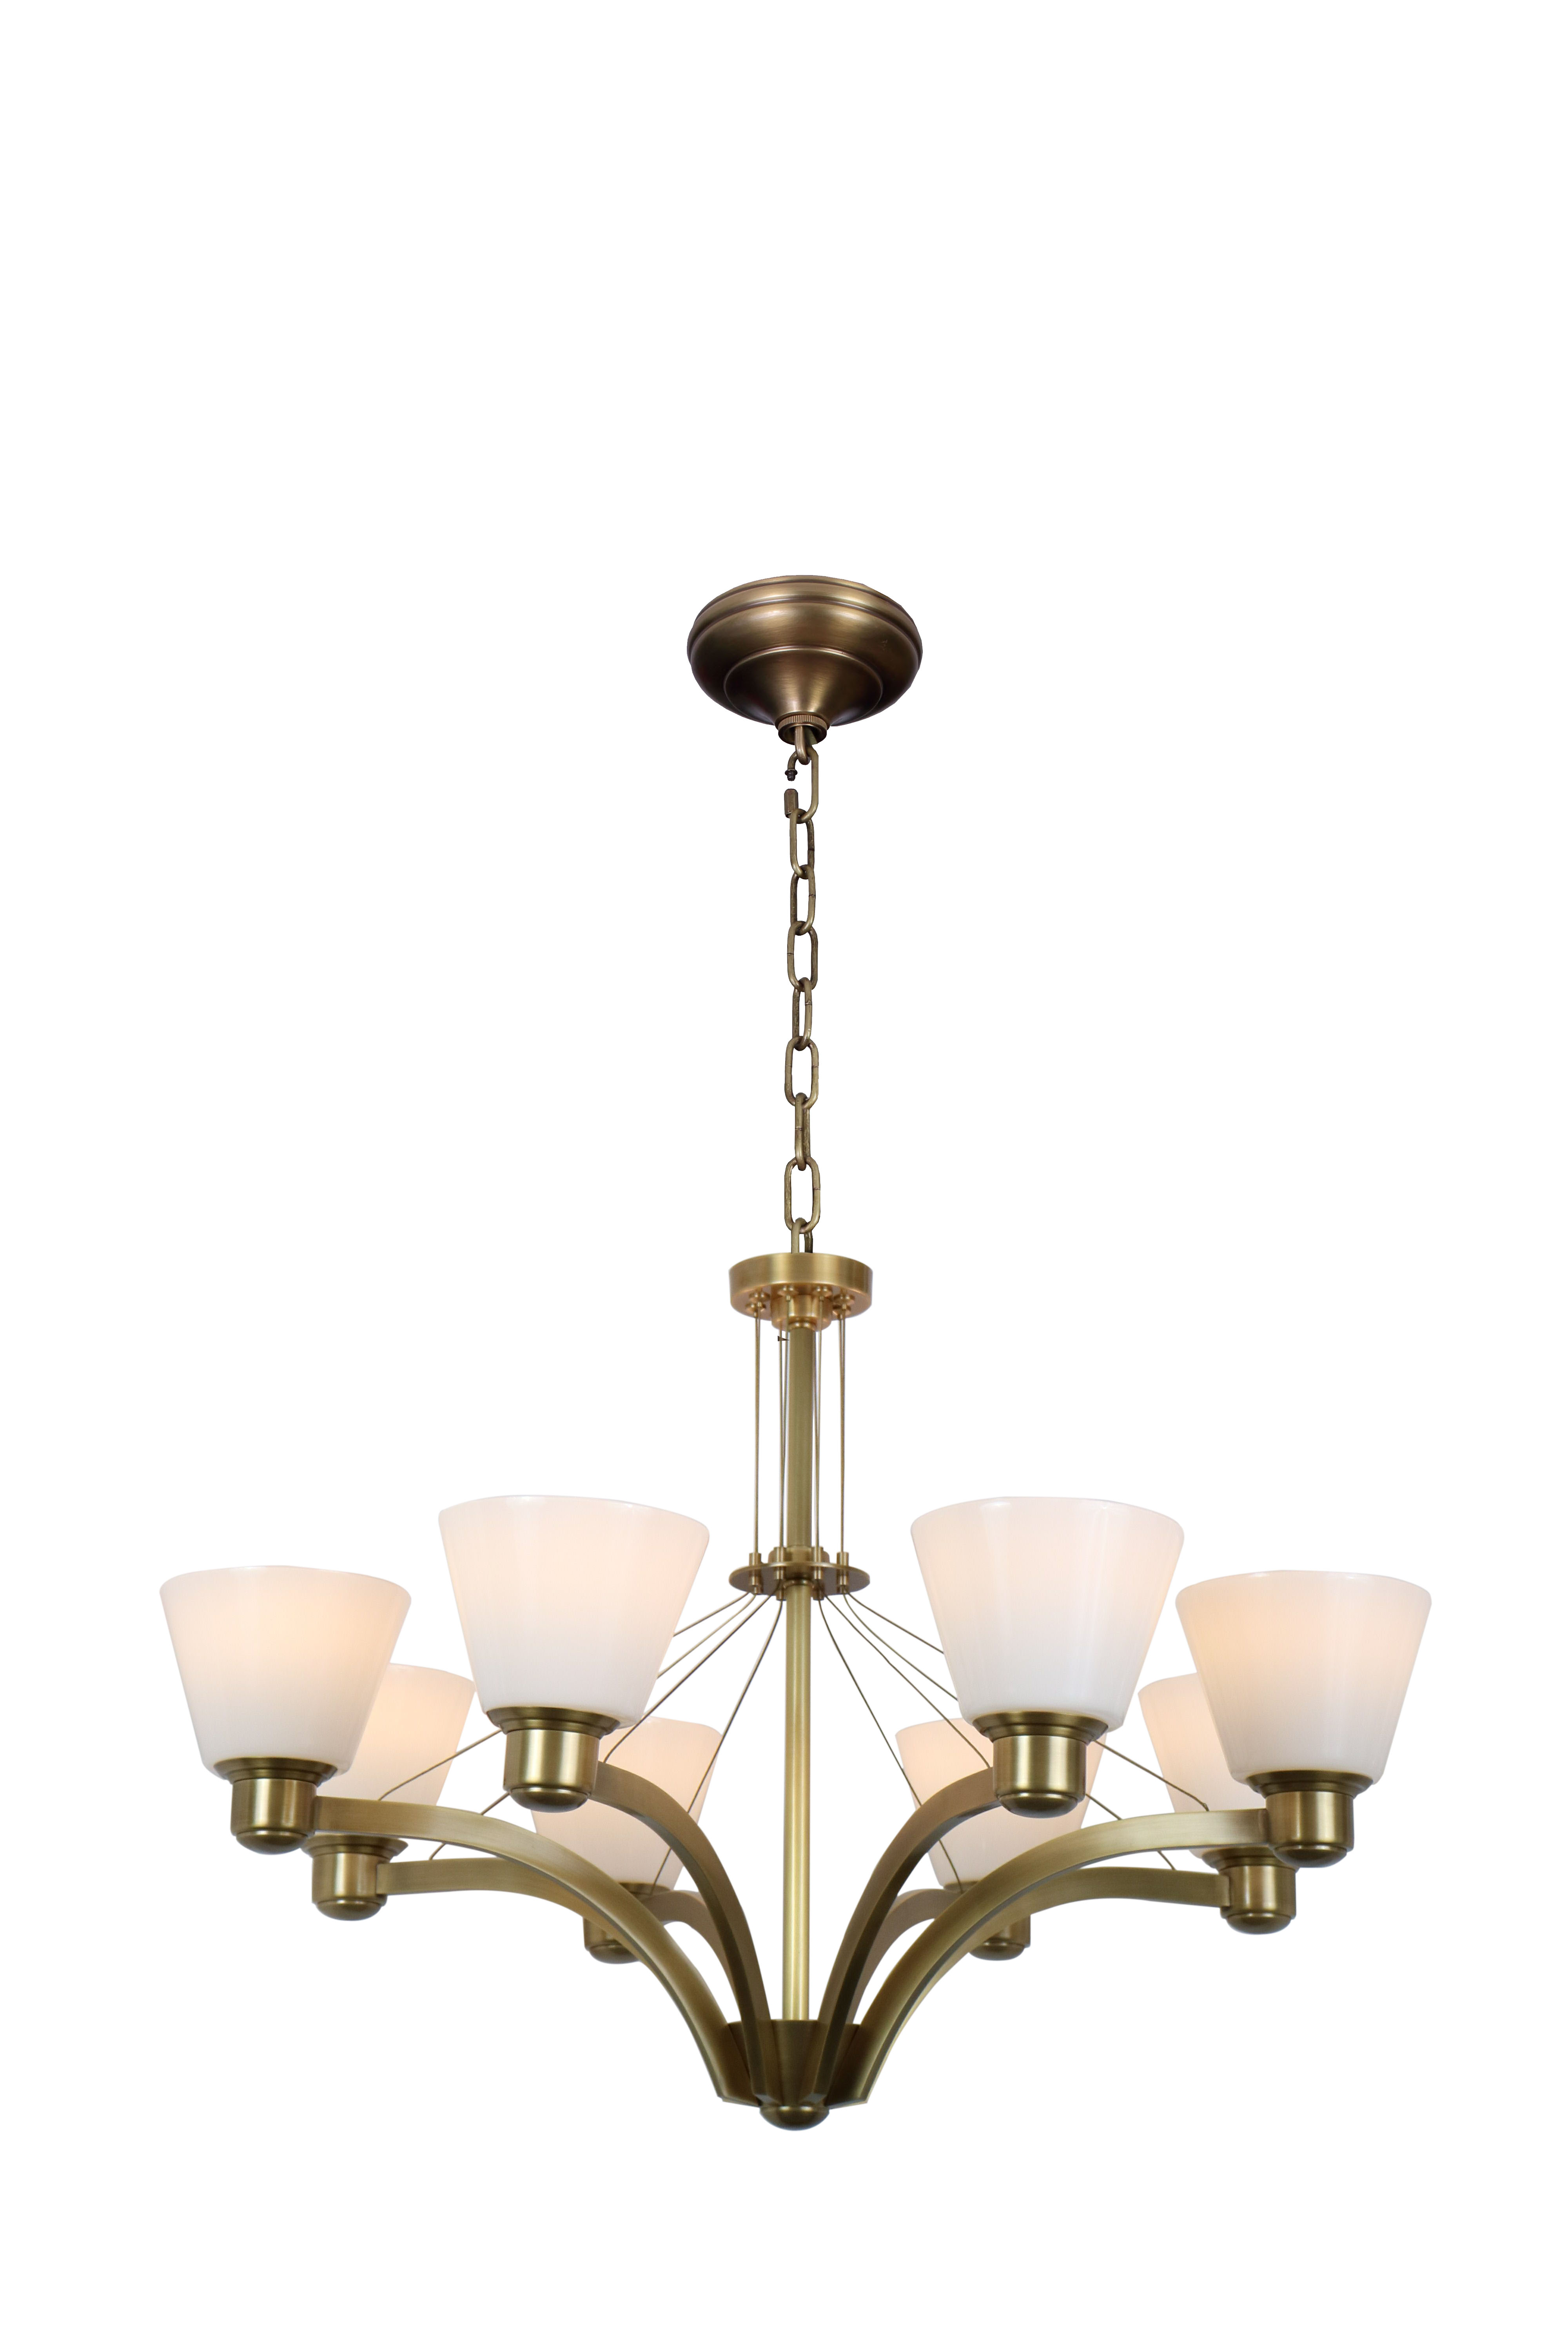 the year, lighting 2001 series, W820*H580mm new American style chandelier, all copper